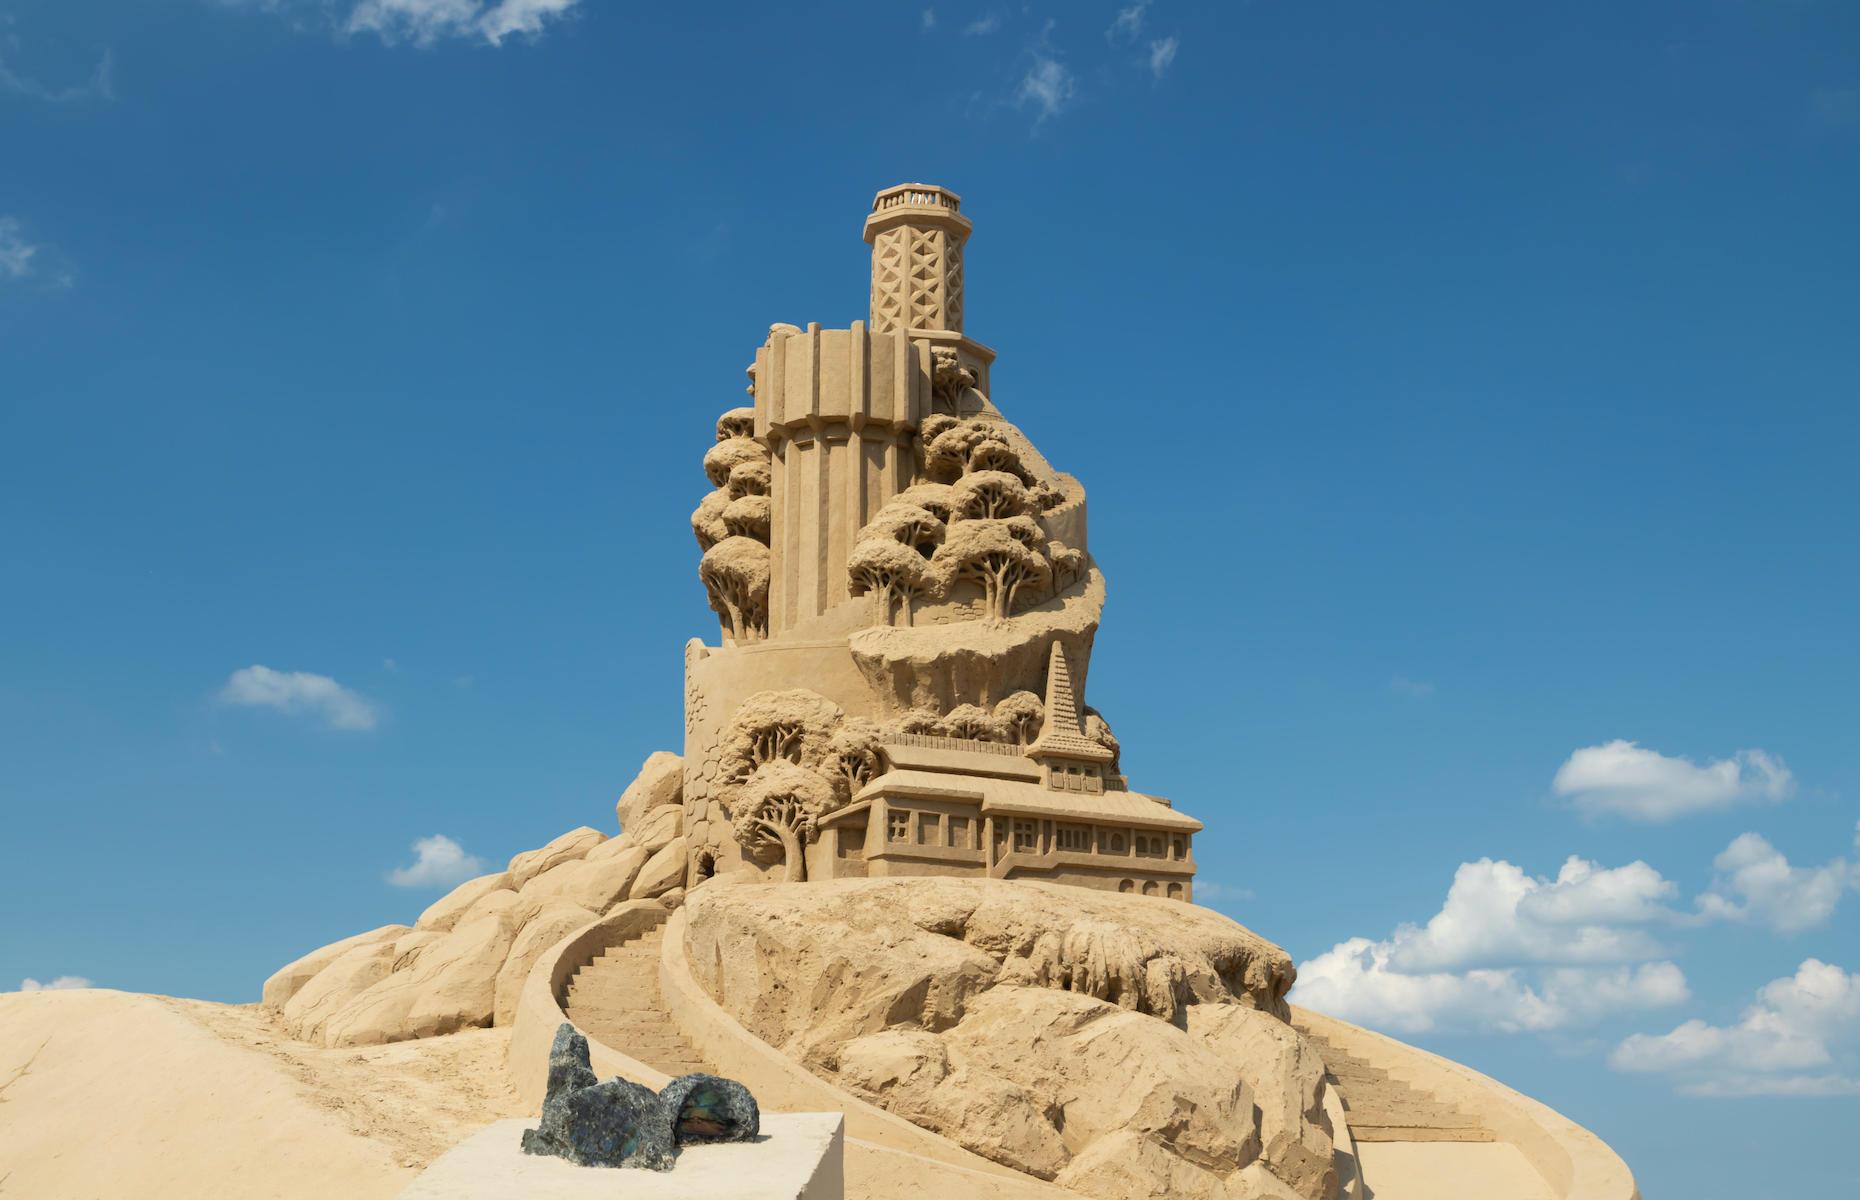 <p>The annual appearance of the Hiekkalinna, or Lappeenranta Sandcastle, is a highly anticipated event in the Finnish city on the banks of Lake Saimaa, the largest lake in Finland. This is the elaborate creation from 2014, which was created by a collective of sand artists. Since 2004, a giant castle has been carved at the end of Linnoitusniemi Cape from millions of kilos of sand with themes ranging from pirates and knights to historic events. The sandcastle area also has rides and family activities.</p>